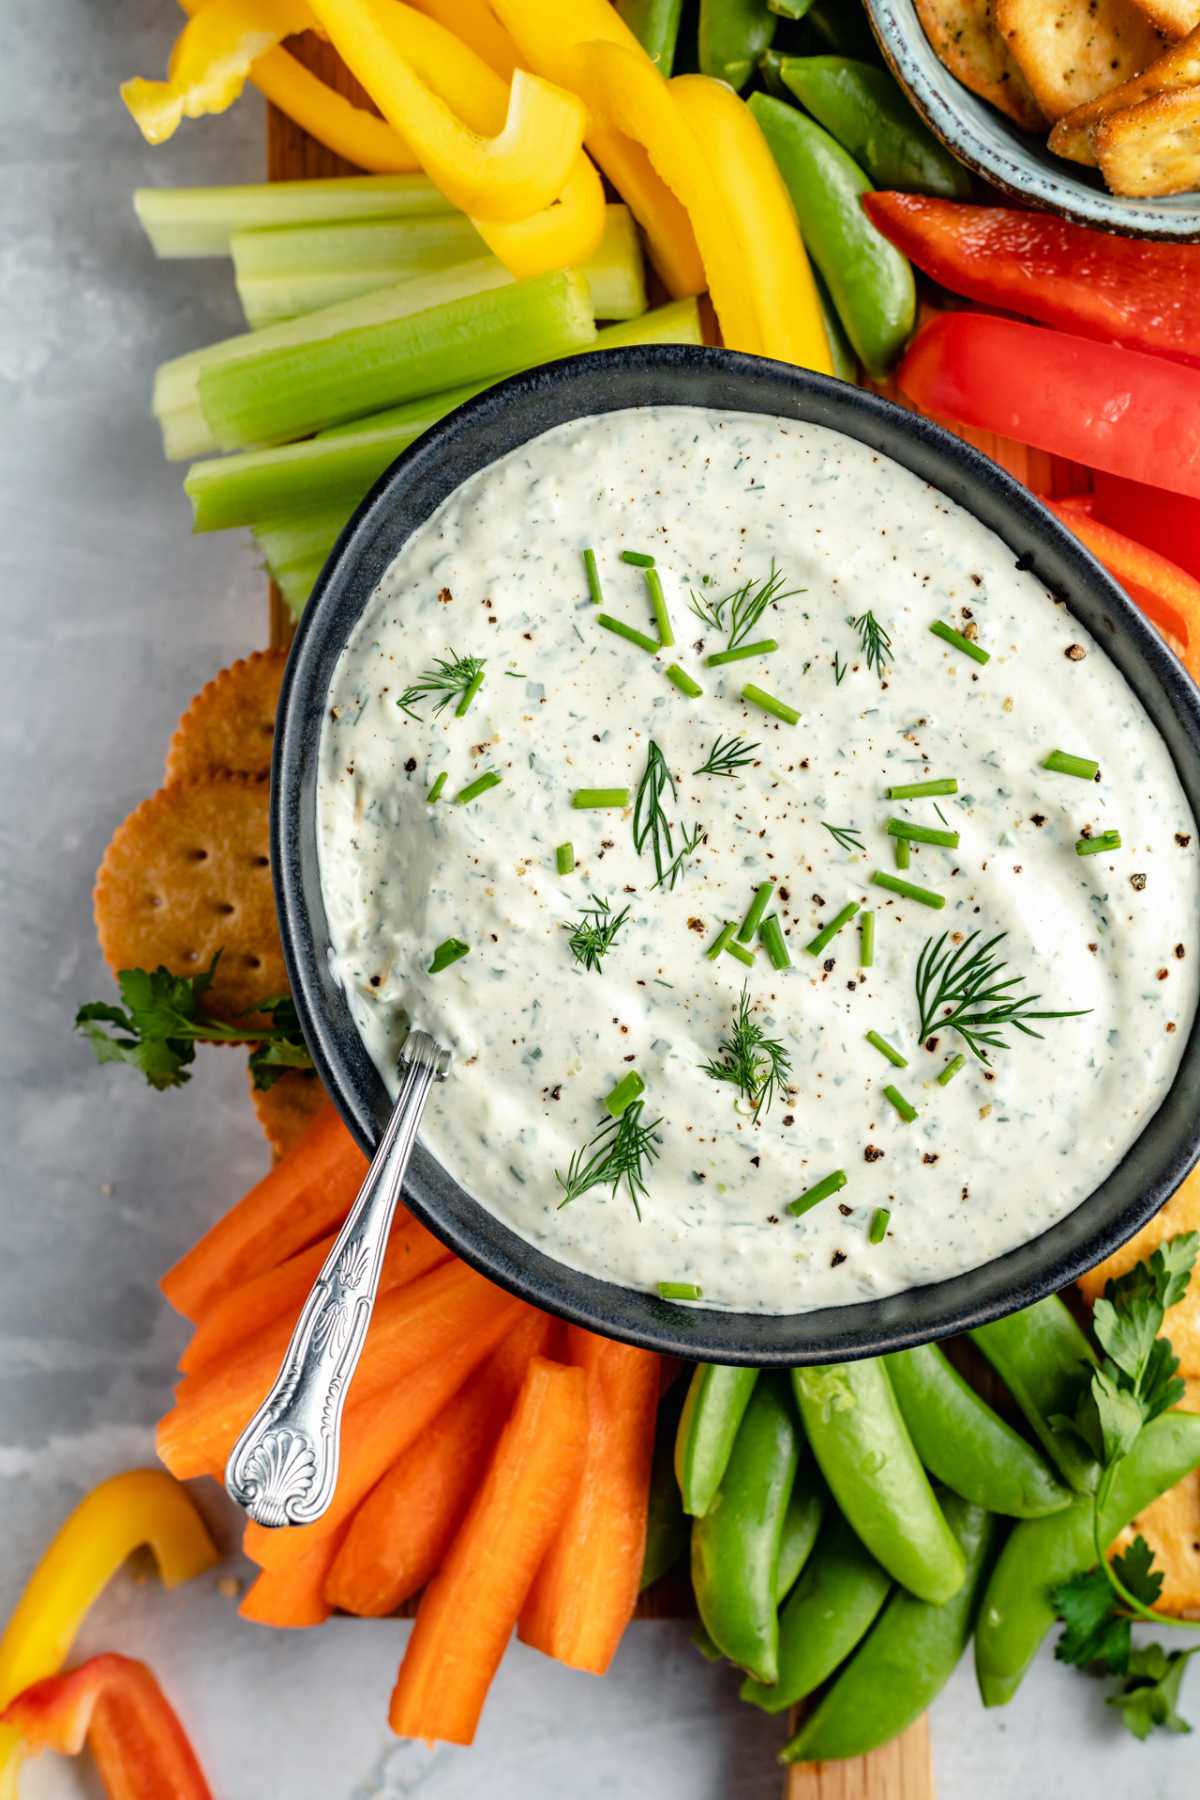 Fresh cut veggies and crackers around a bowl of dip with herbs on top.